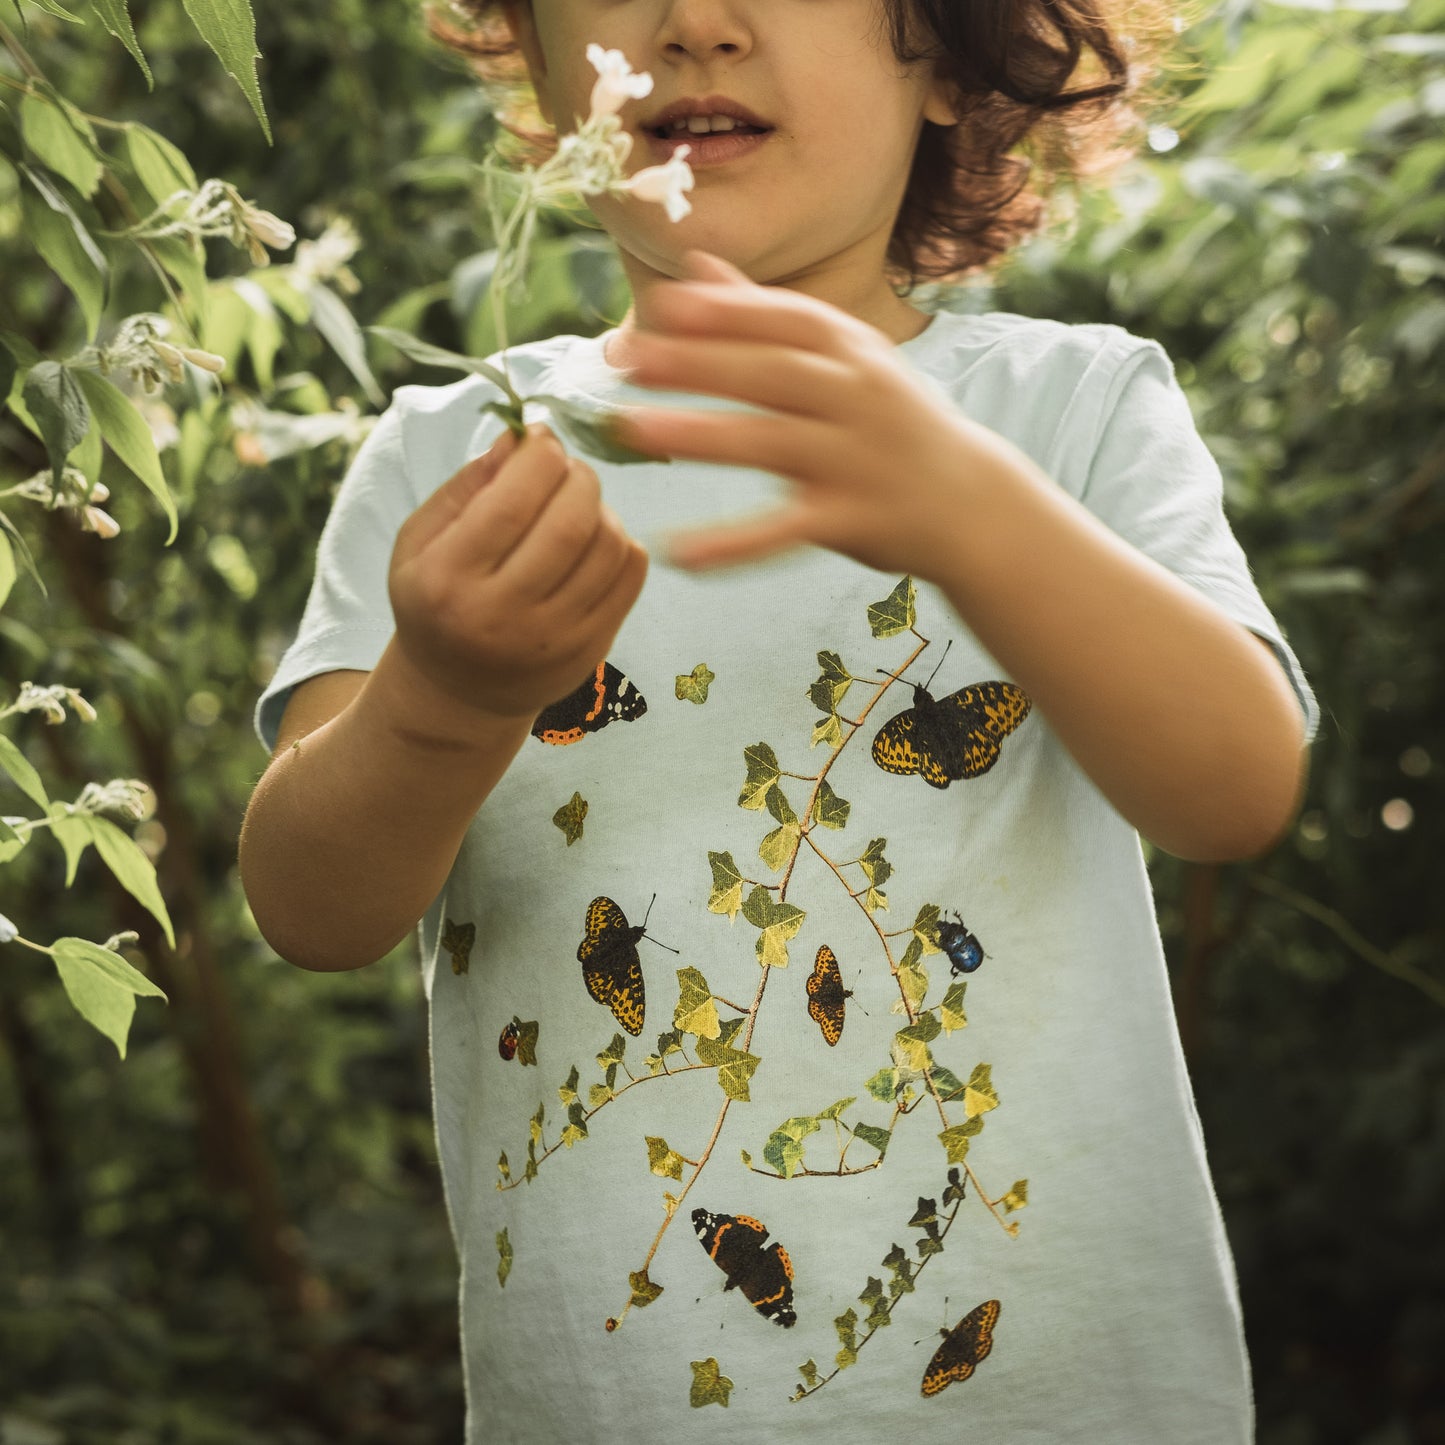 Girl playing in bushes summertime holding a flower. Wearing a green t-shirt with butterflies and ivy.  